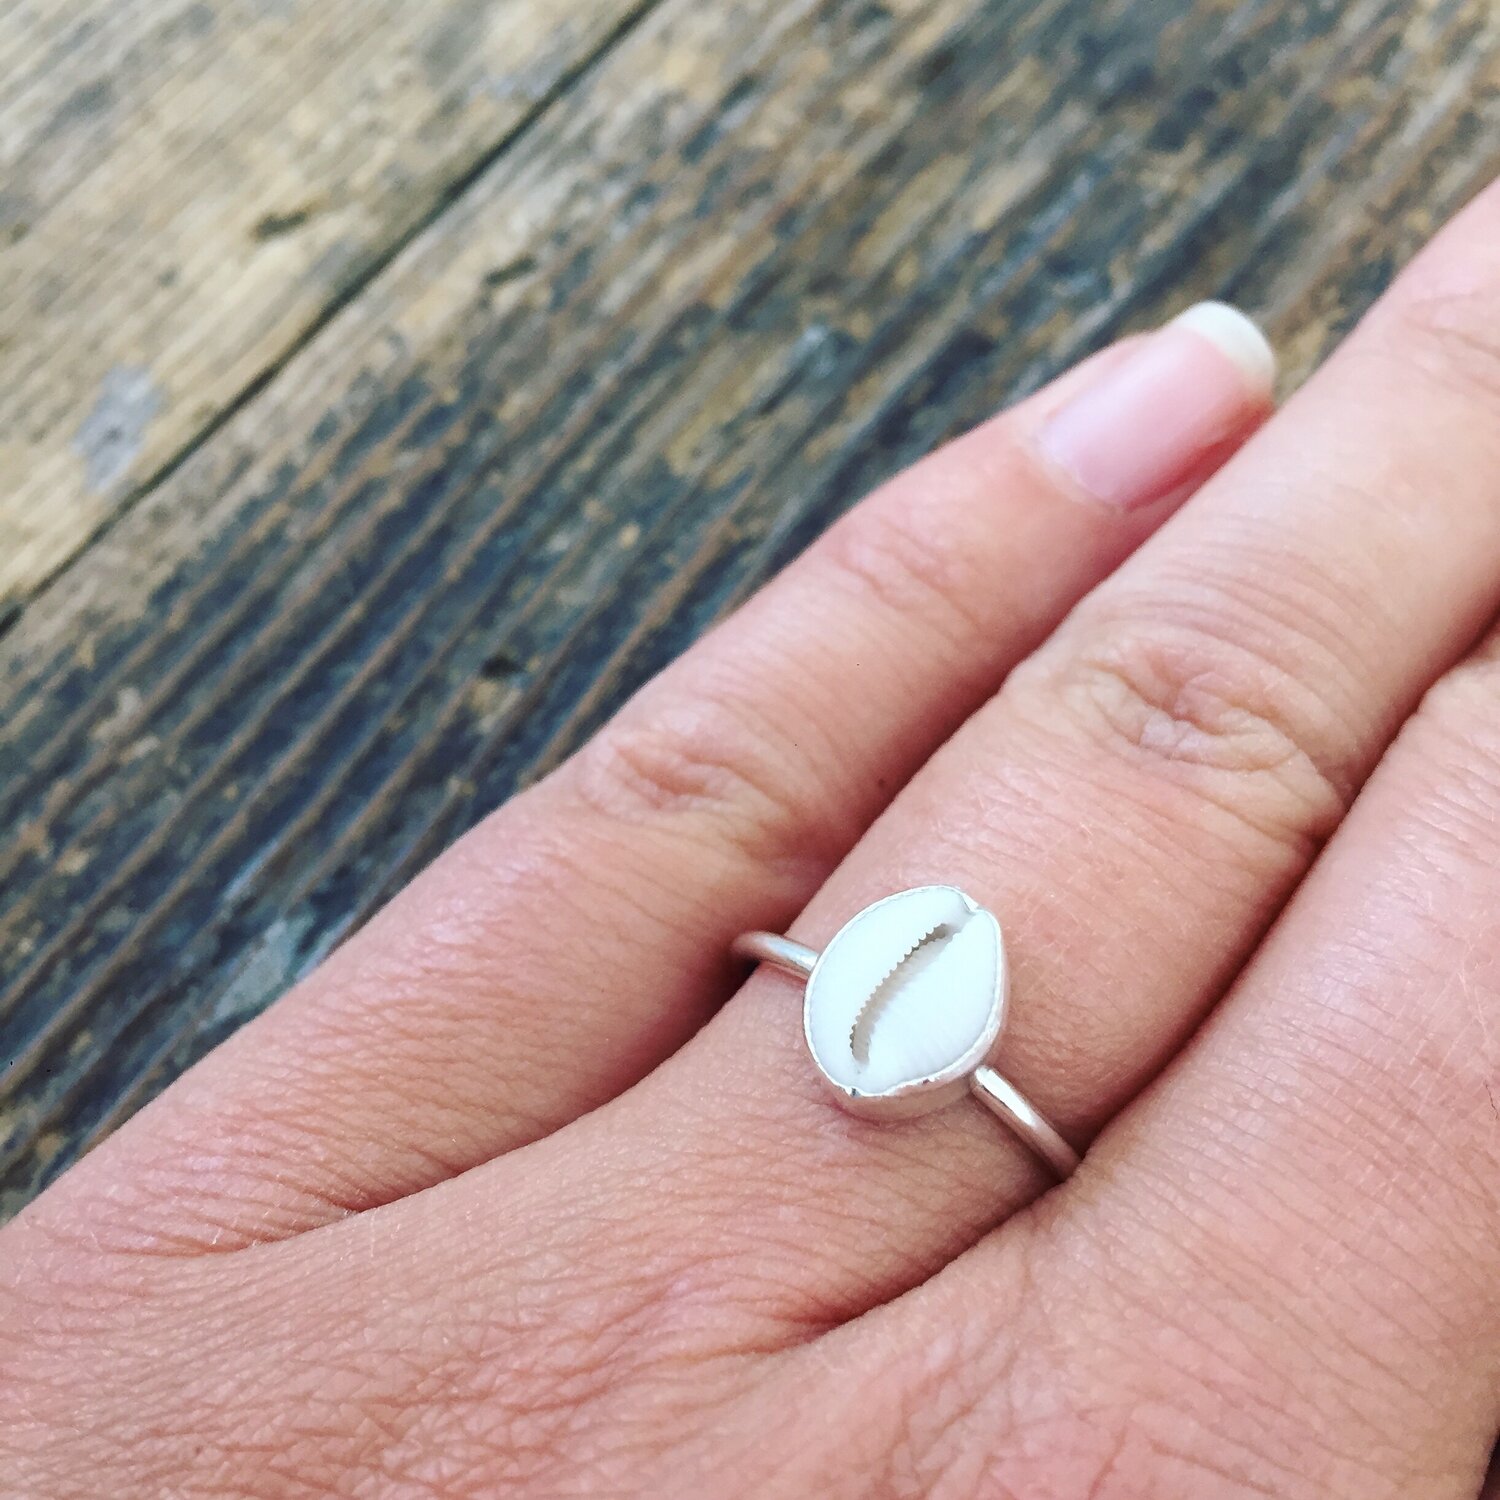 Natural Cowrie Shell Ring with twist*statement ring*Sterling Silver Ring*Bohemian Ring*Cowrie mermaid ring*Money Cowrie ring*seashell ring*